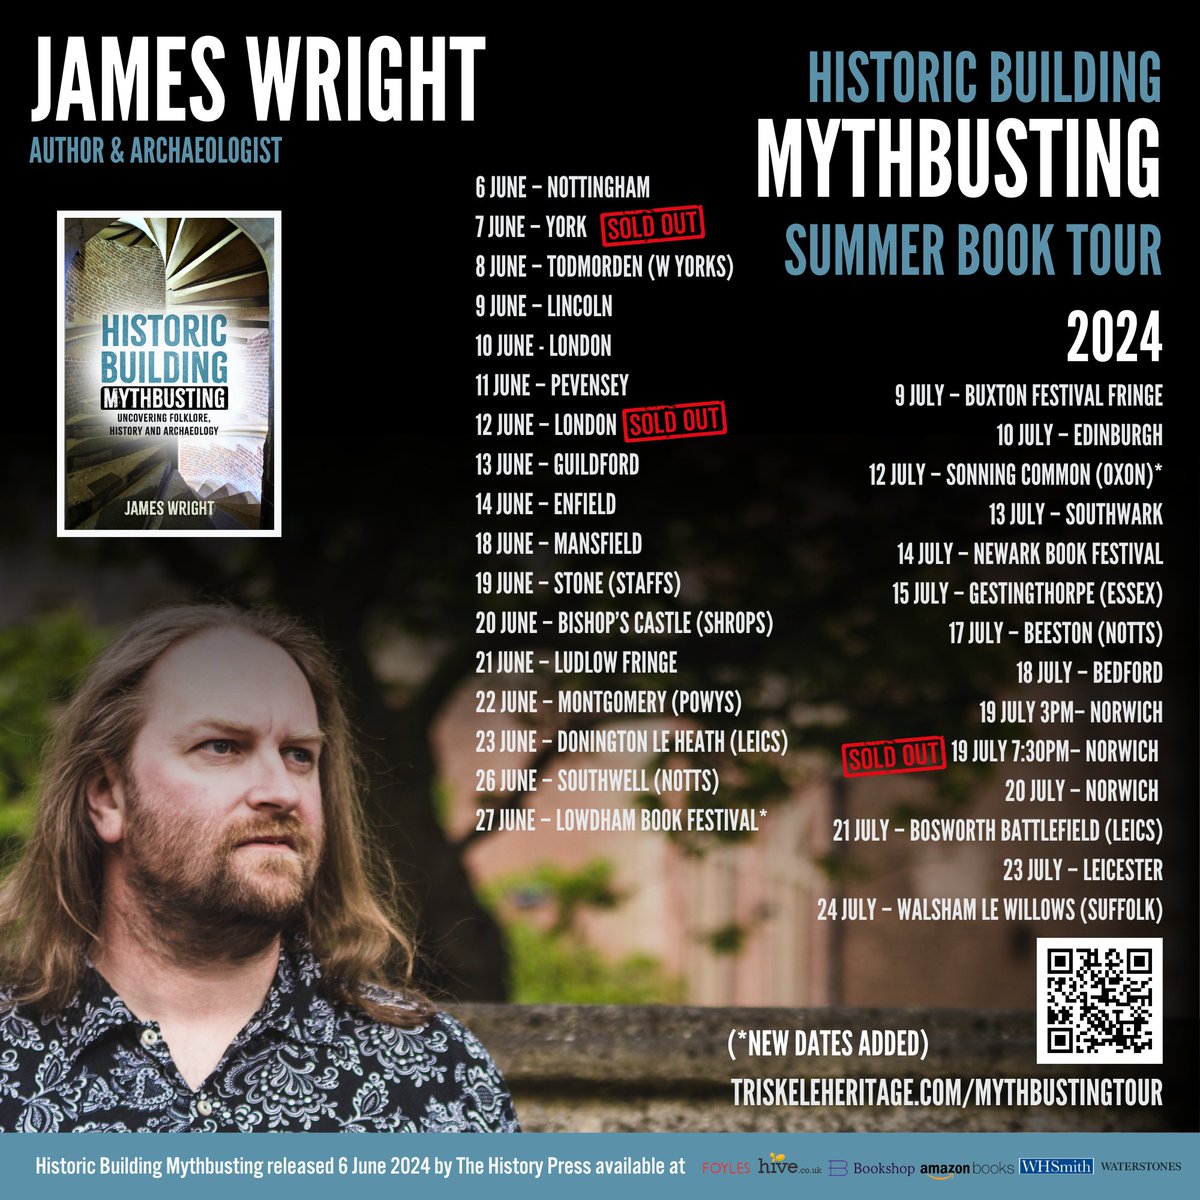 Exciting news for the book tour: several shows have sold out and there are 2 new dates!

If you are planning on coming please book in advance as many events are now low on tickets: 
triskeleheritage.com/mythbustingtou…

Historic Building Mythbusting is released 6 June by @TheHistoryPress